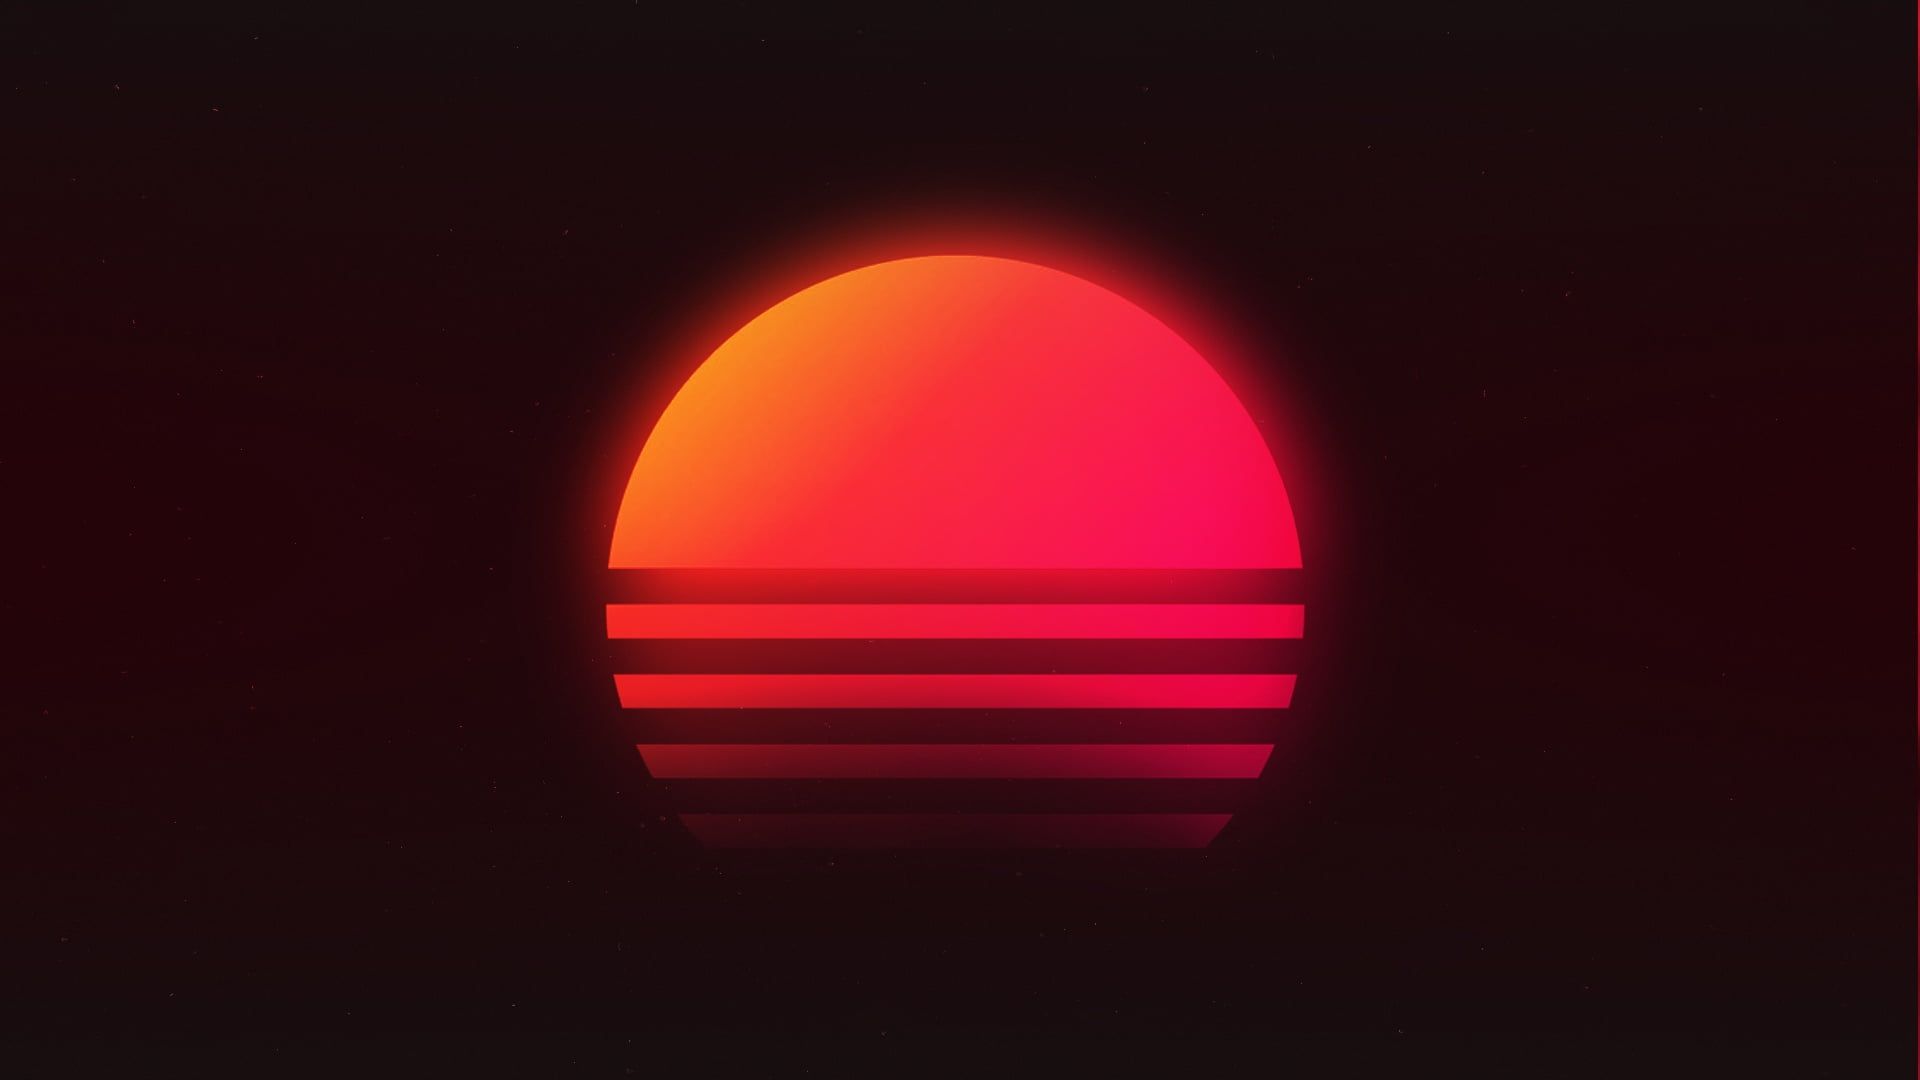 The sun #Music #Star #Background #Neon 's #Synth #Retrowave